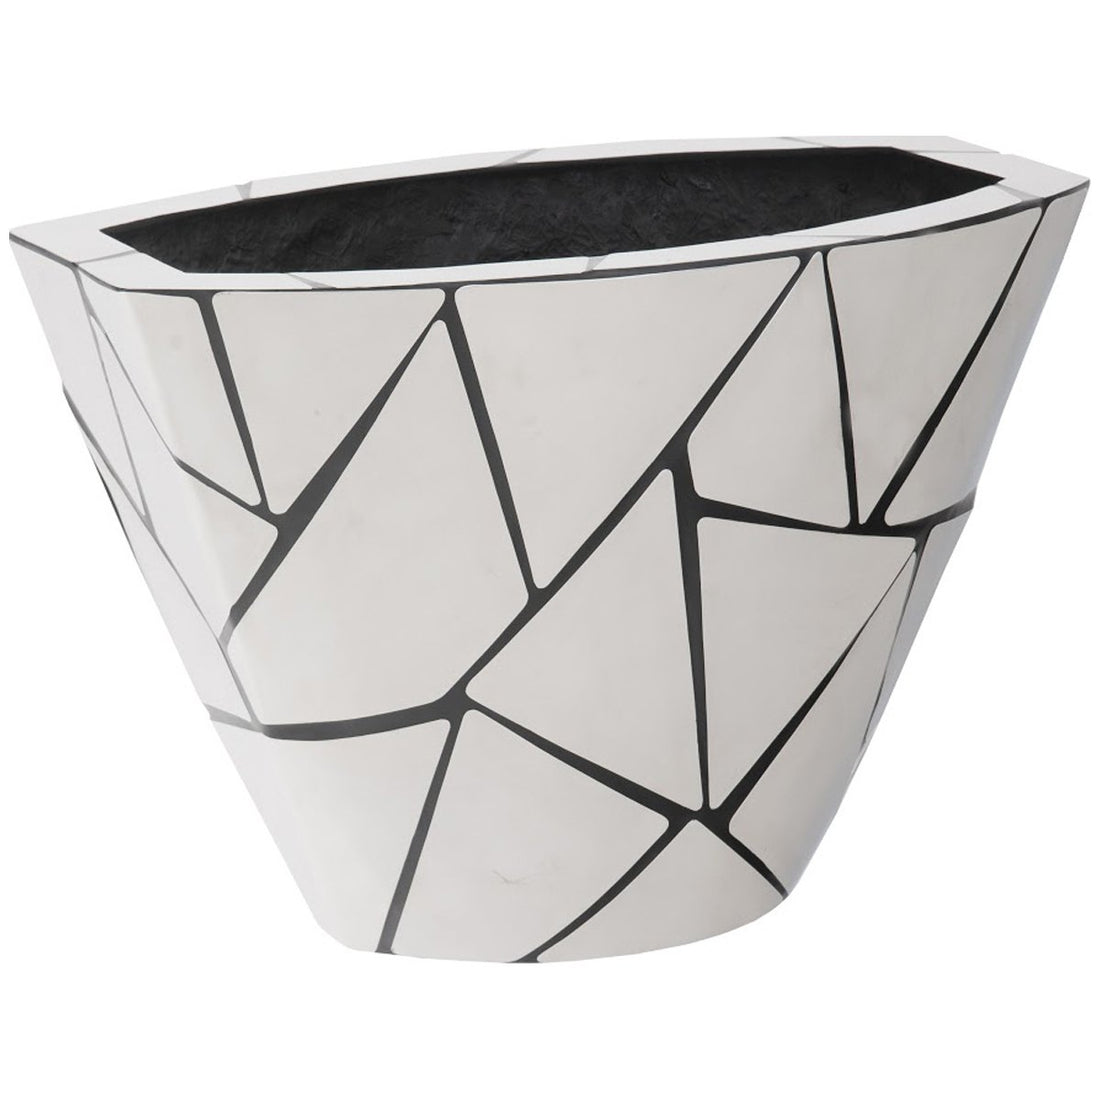 Phillips Collection Triangle Crazy Cut Planter, Small